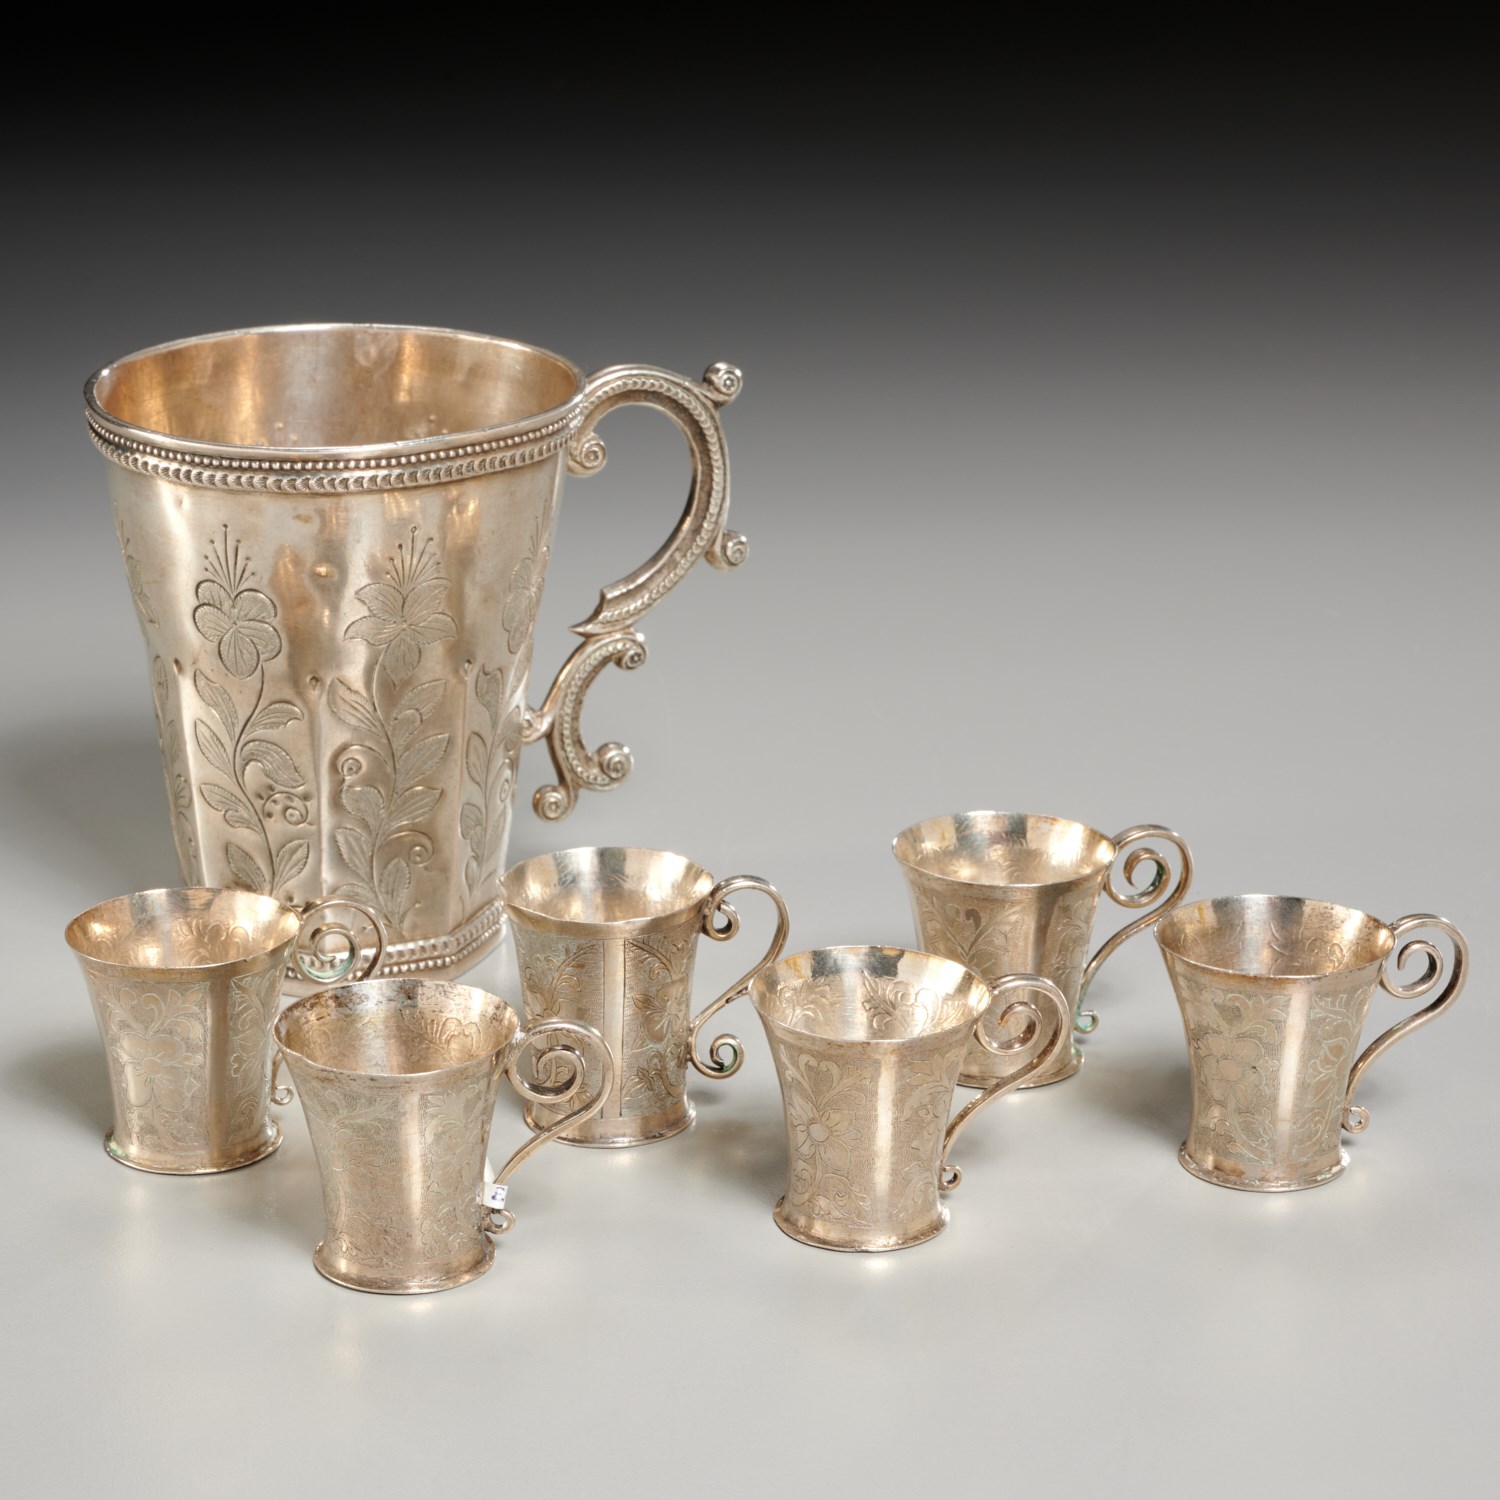 SPANISH COLONIAL ENGRAVED SILVER